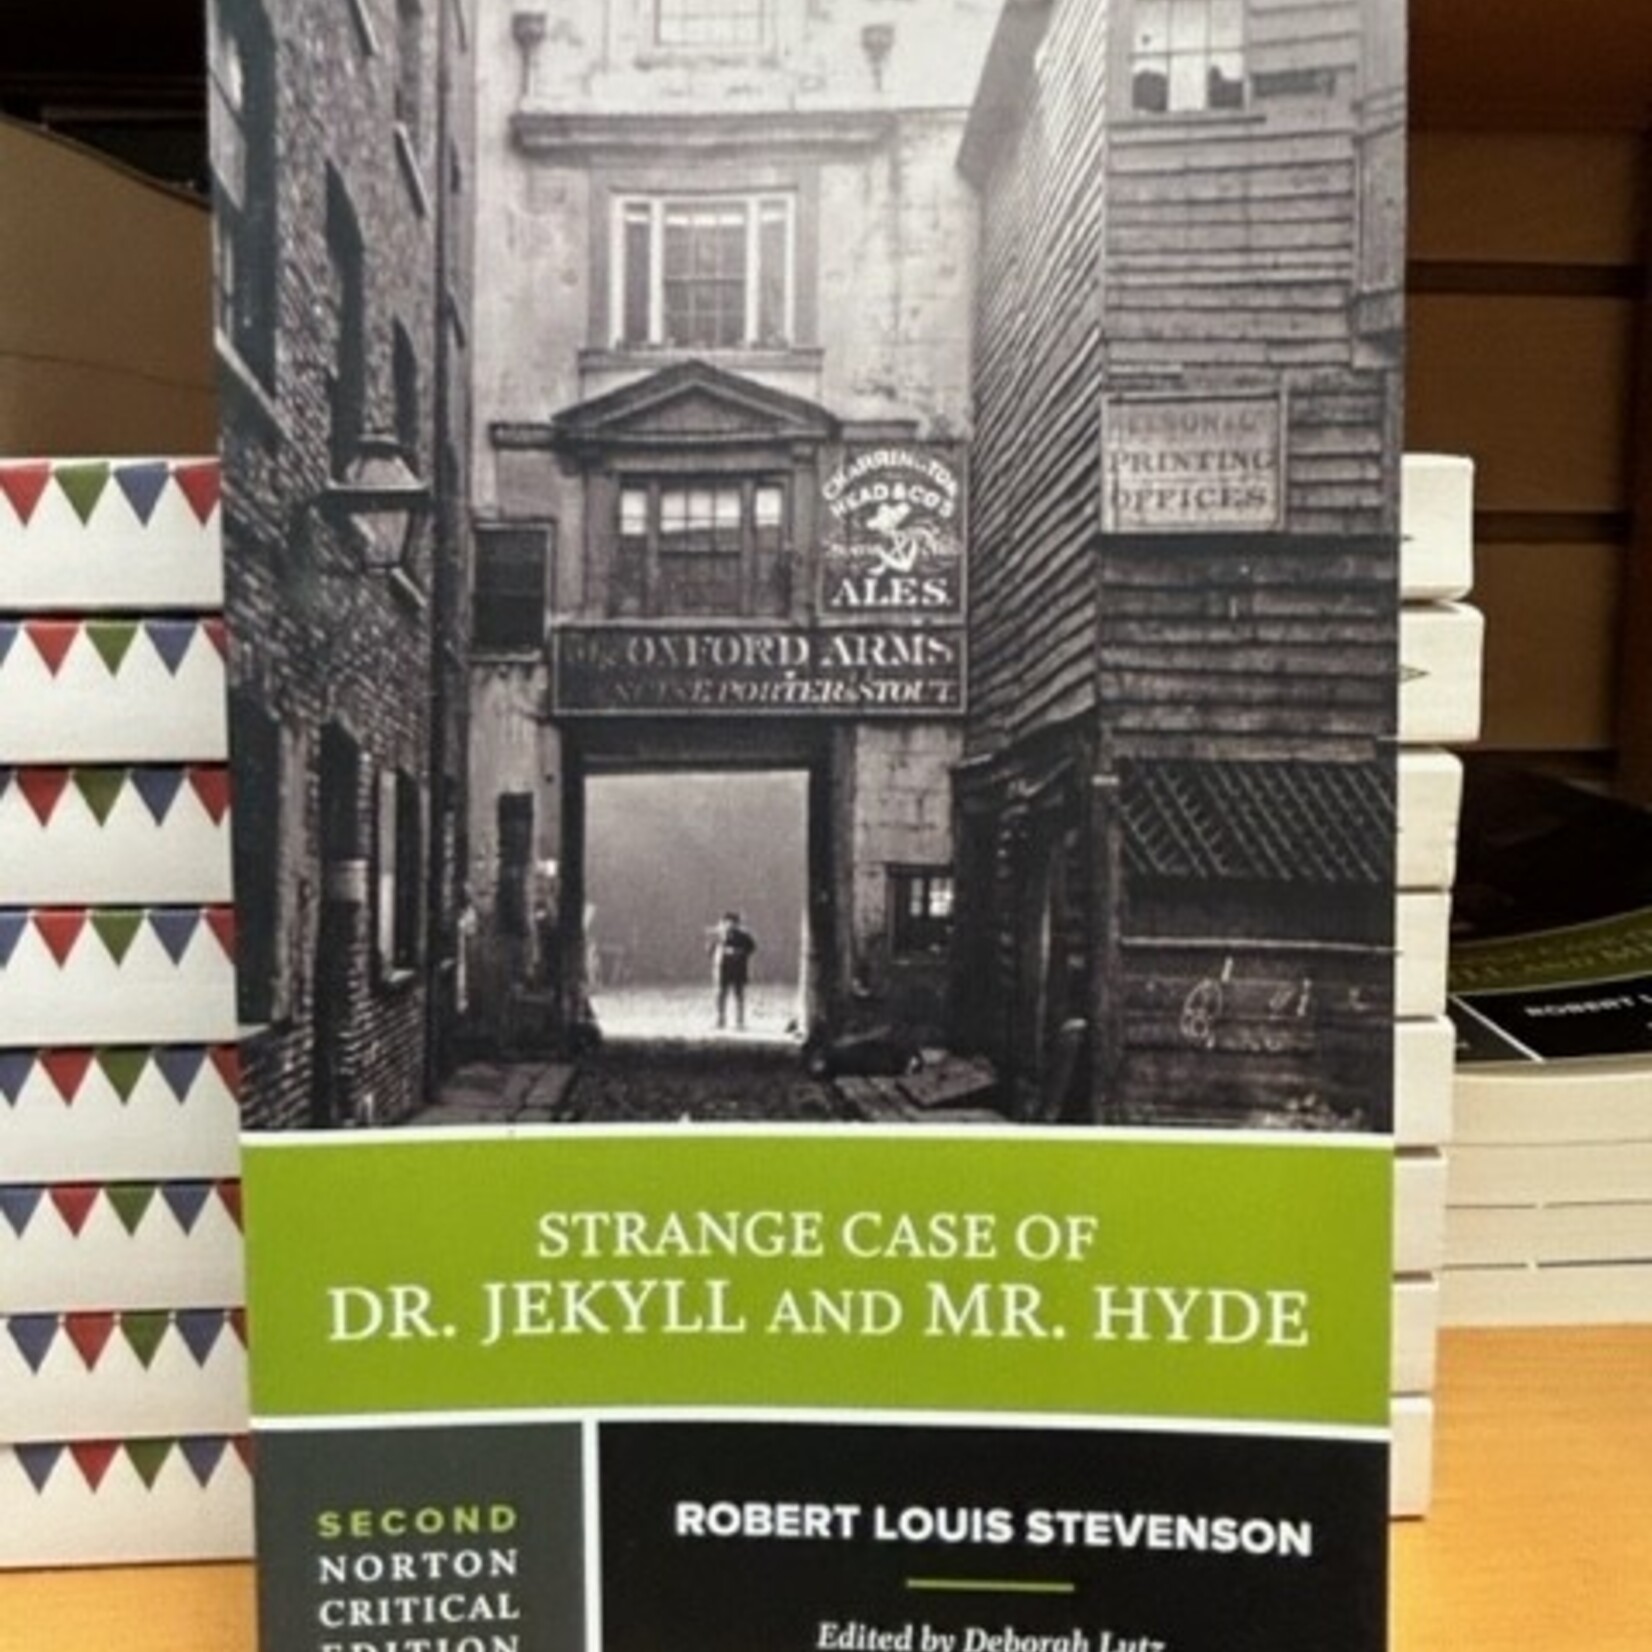 STRANGE CASE OF DR. JEKYLL AND MR. HYDE 2nd Norton Critical Ed